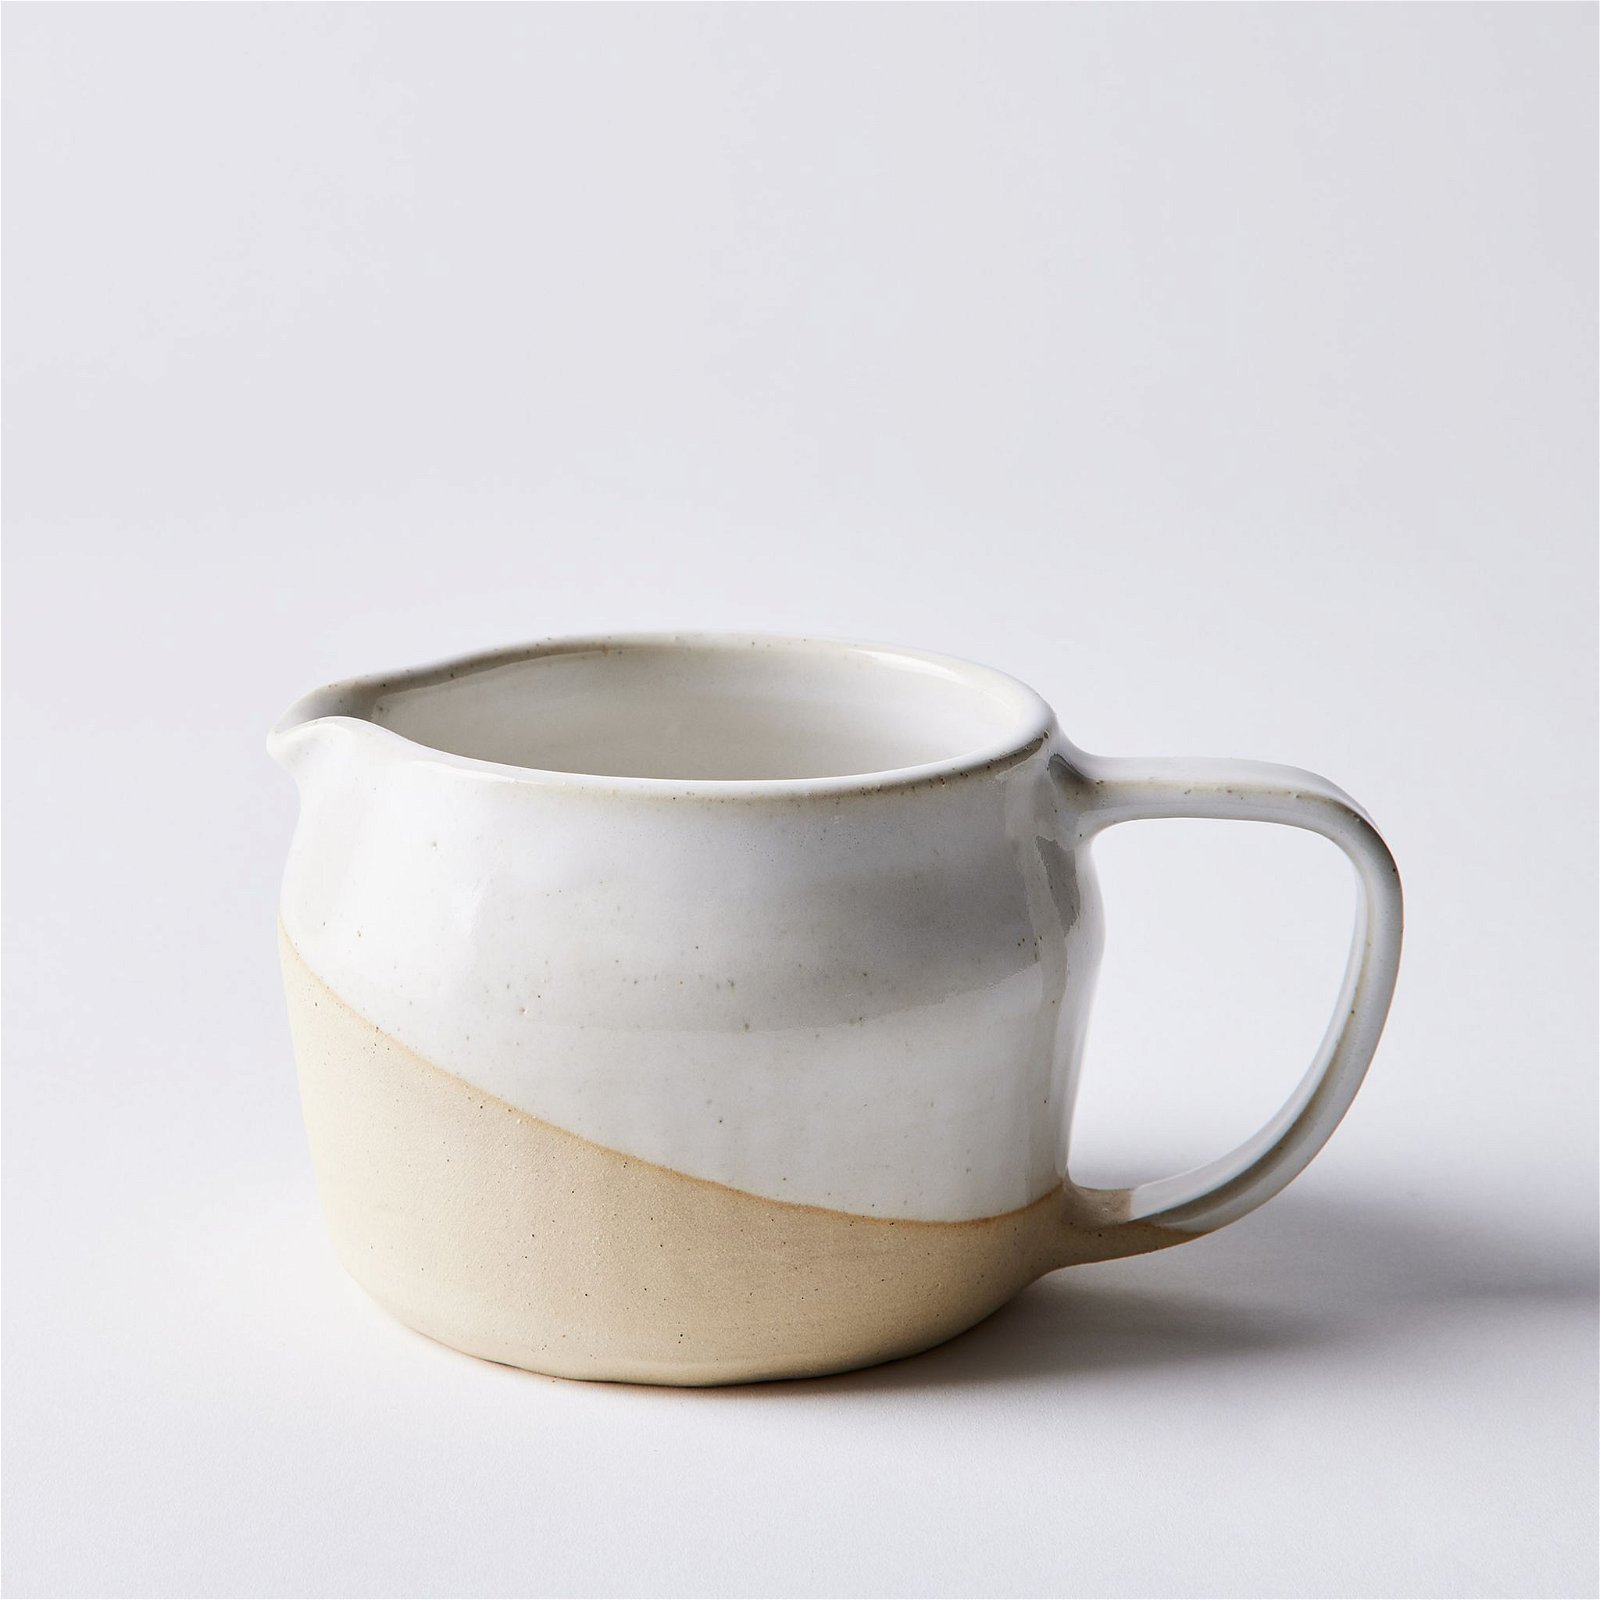 Limited-Edition Handmade Gravy Boat, by Wild Bower